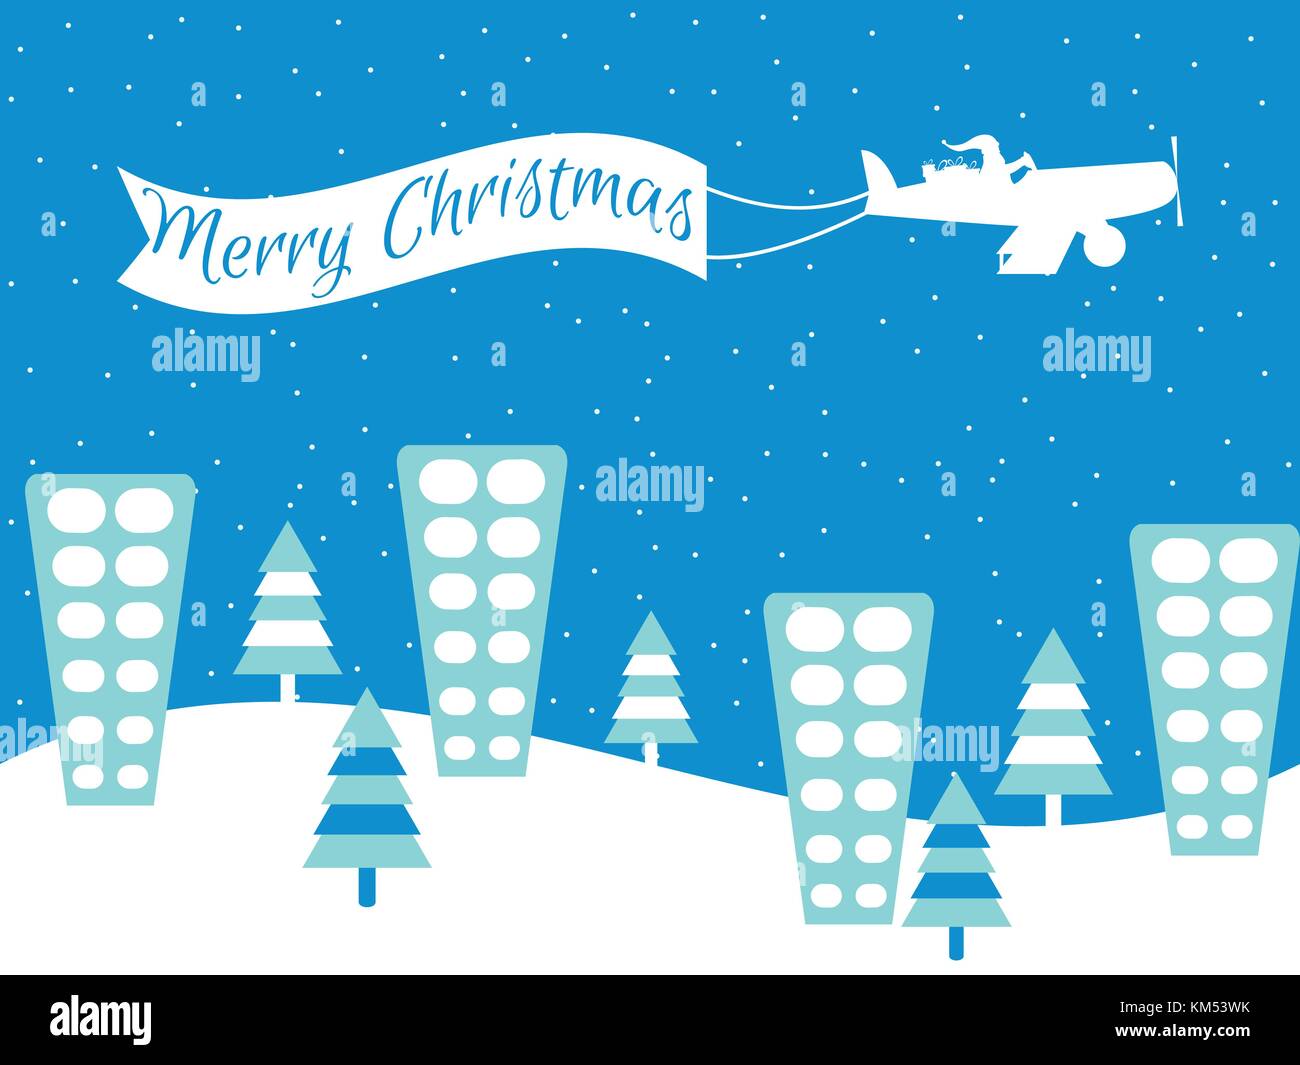 Merry Christmas Santa Claus is flying on a plane in a snow capped city